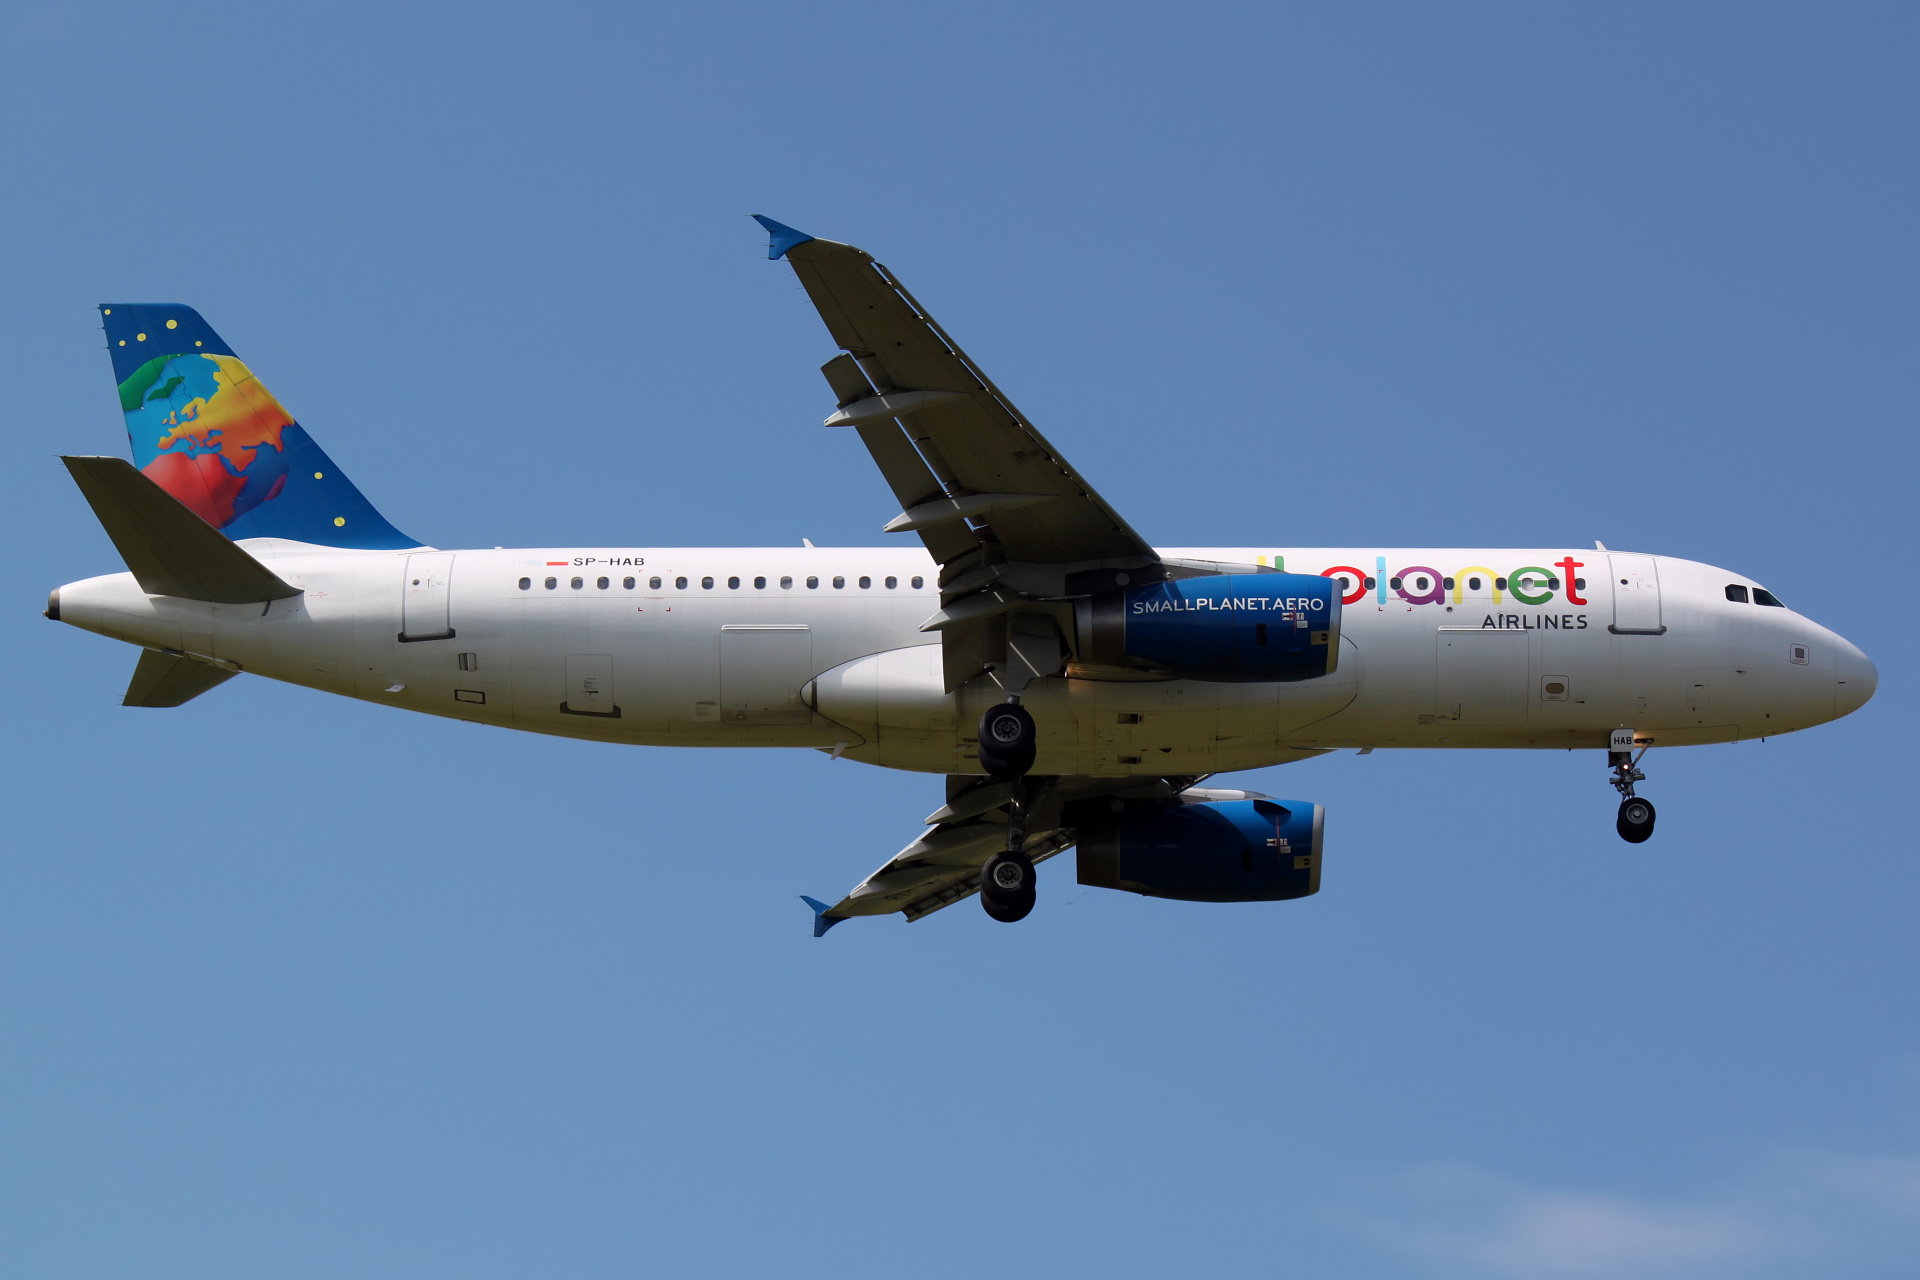 SP-HAB (Aircraft » EPWA Spotting » Airbus A320-200 » Small Planet Airlines)